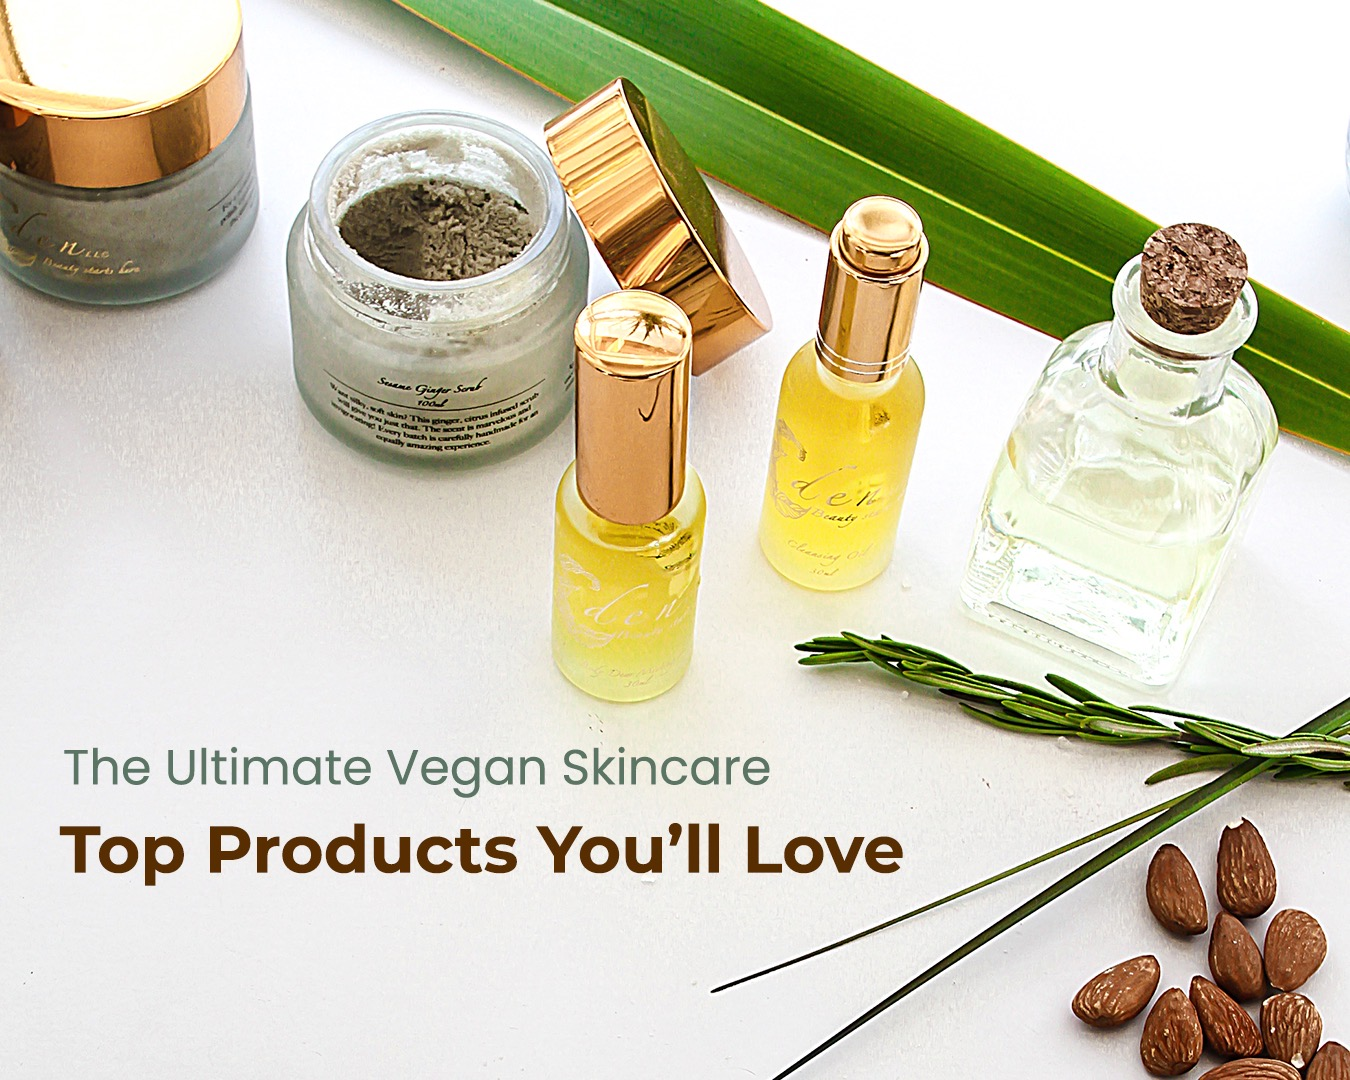 The Ultimate Vegan Skincare Guide: Top Products You’ll Love